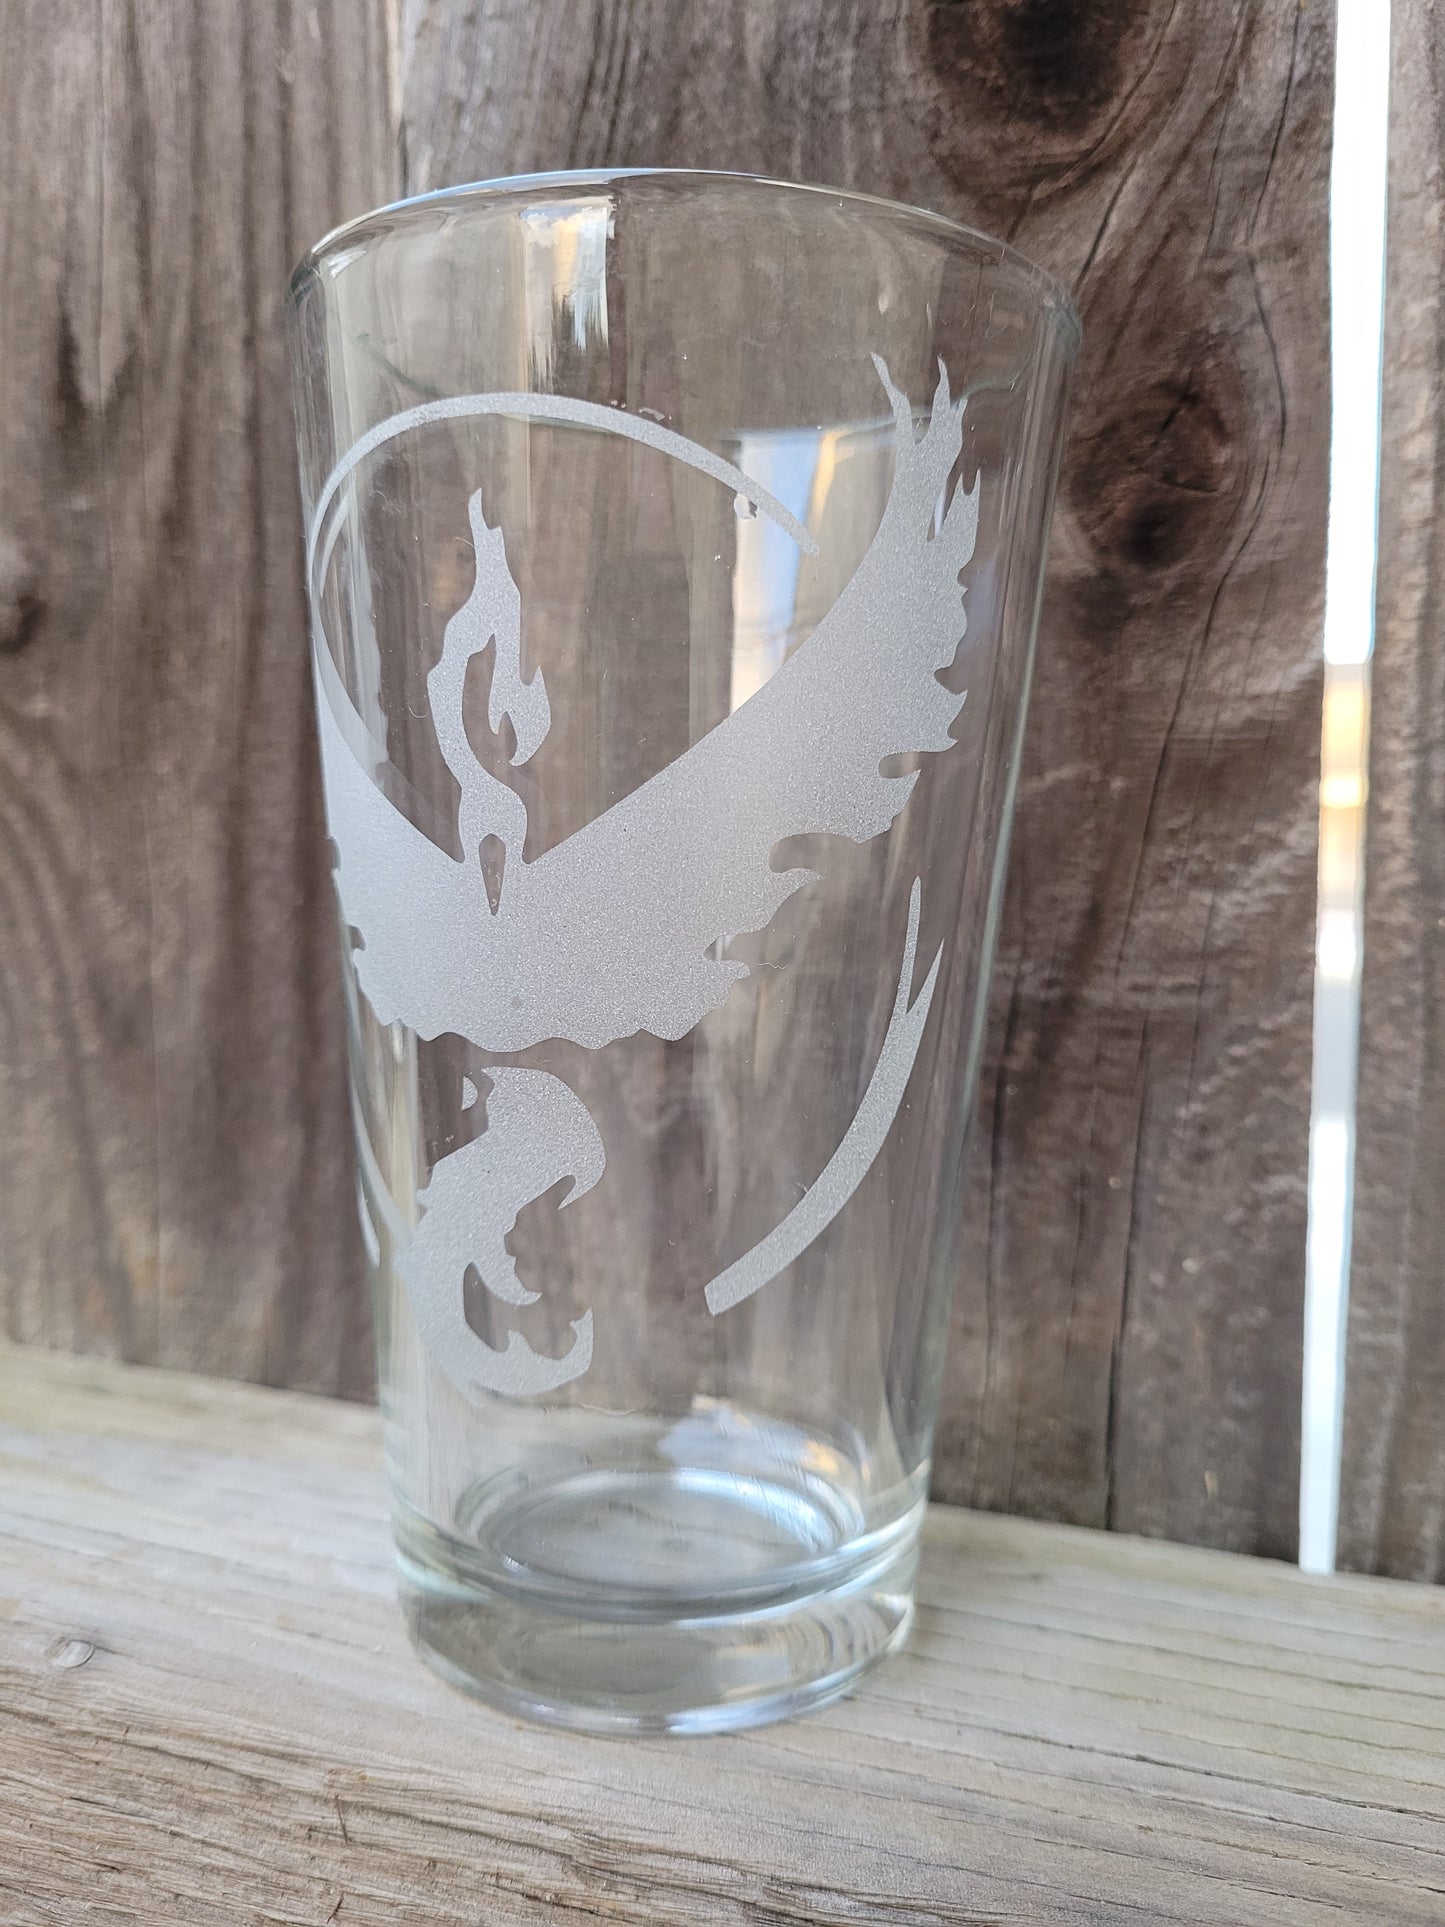 Team Valor Pint Glass - Made to Order